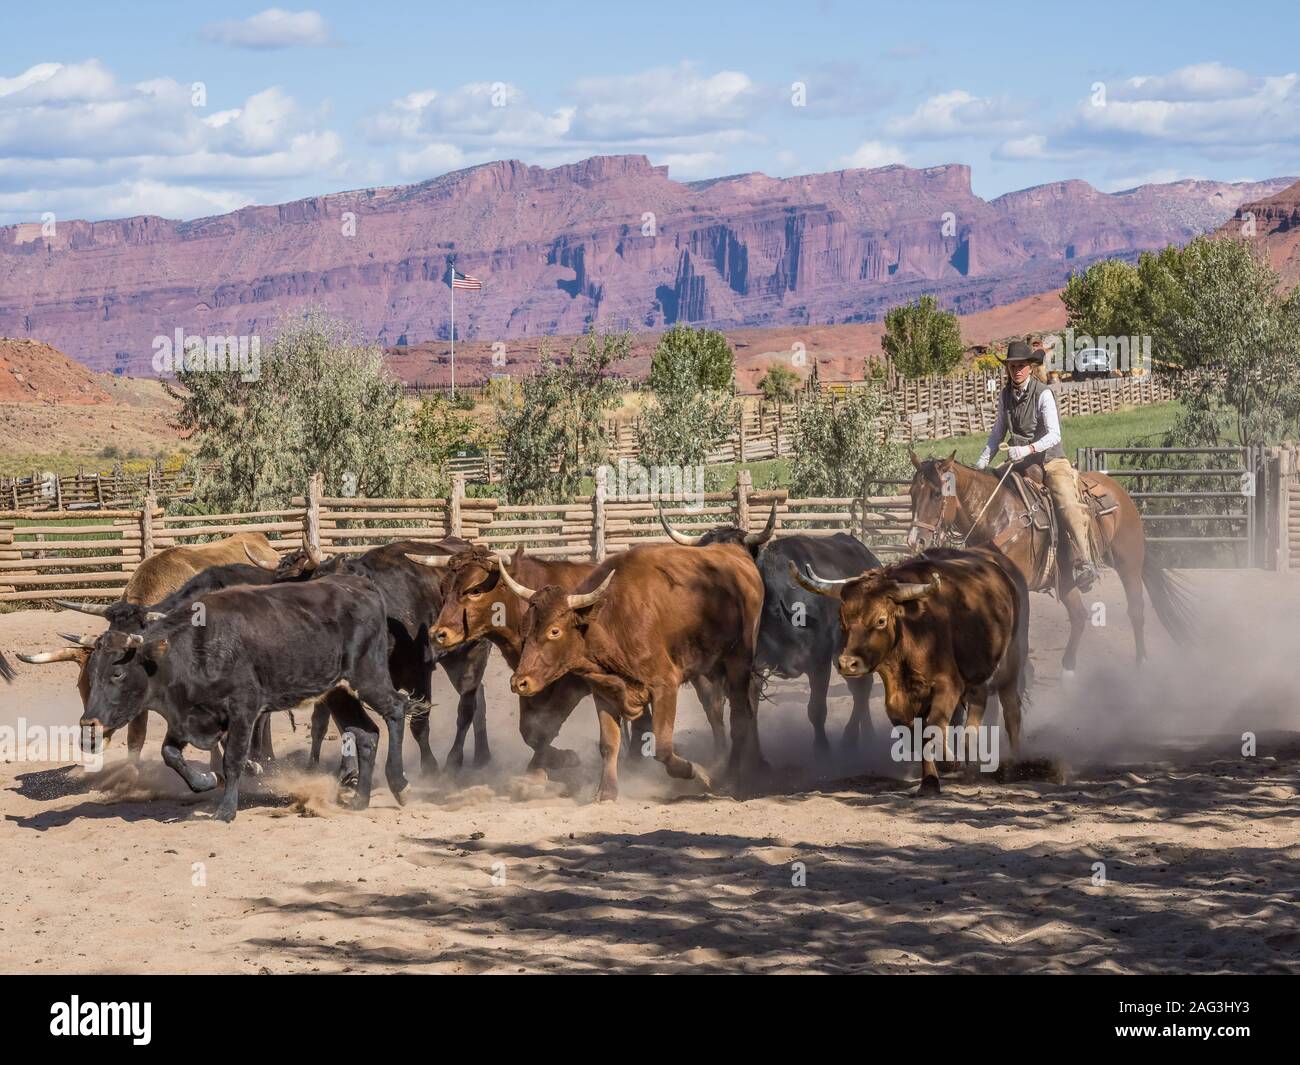 A cowgirl herds longhorn steers on the Red Cliffs Ranch near Moab, Utah.  The sandstone cliffs of the Colorado River valley are in the background. Stock Photo